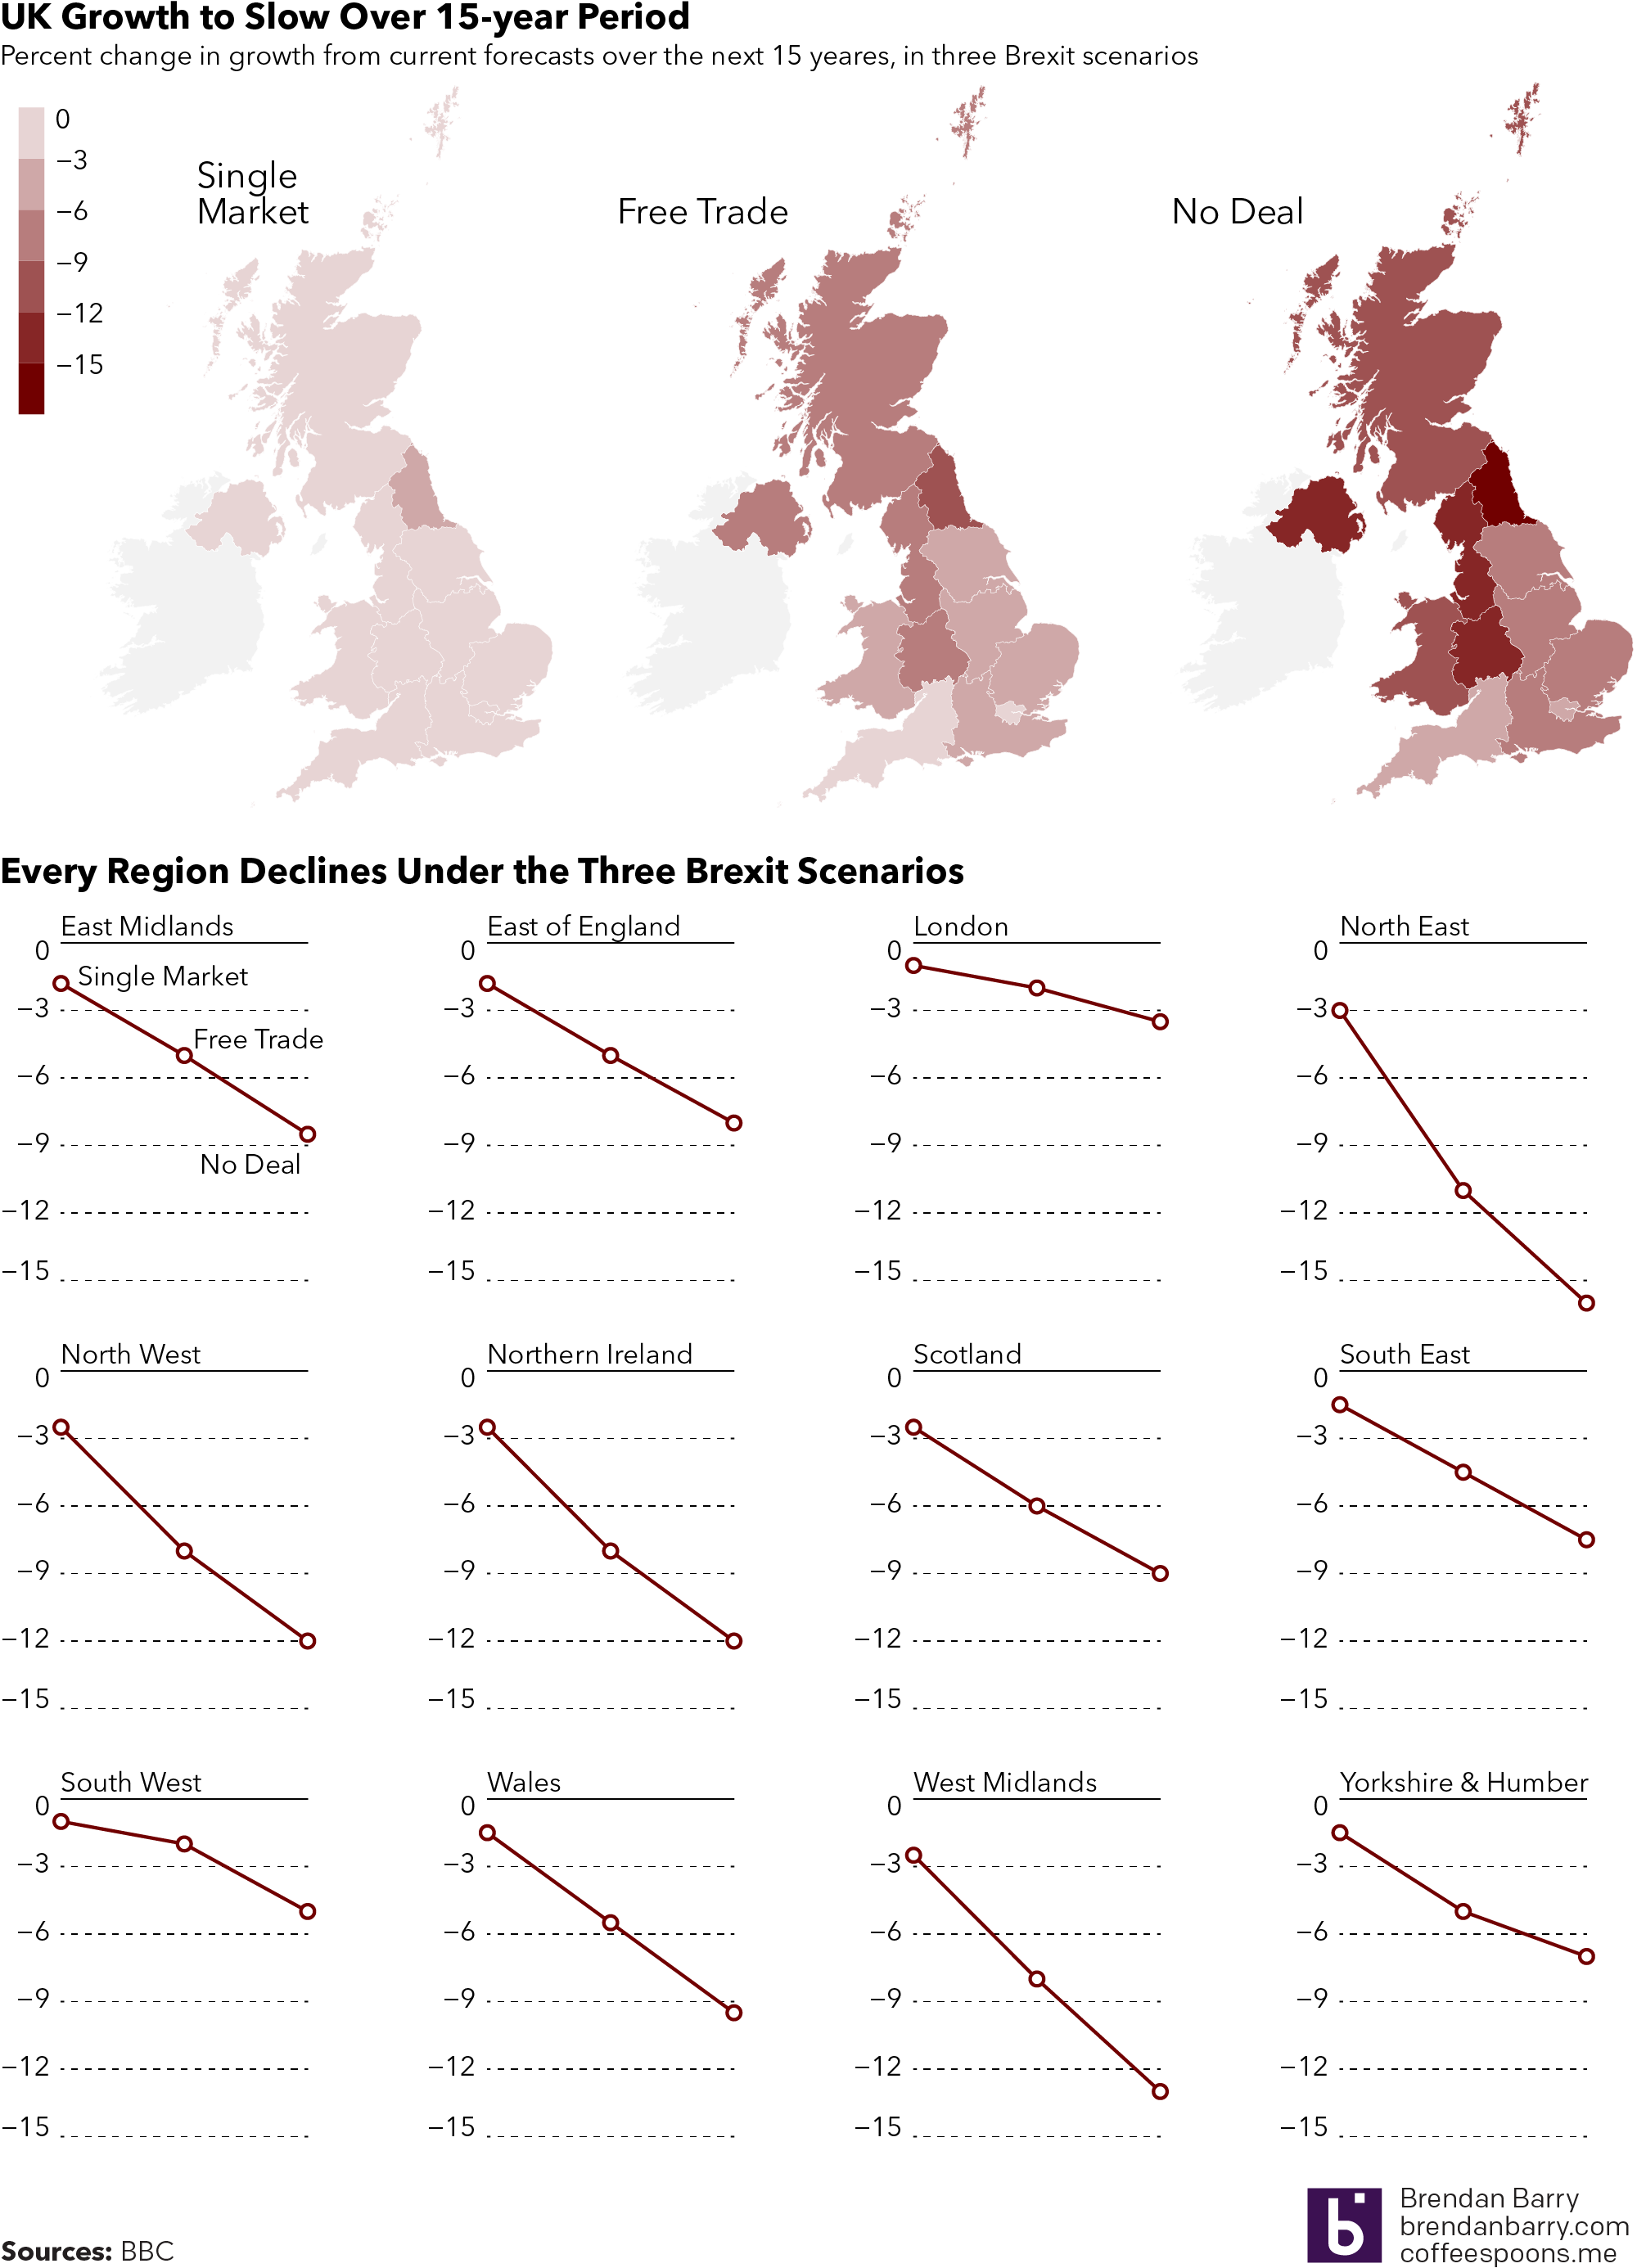 Brexit is bad across all regions of the UK, least so in London and the South West.